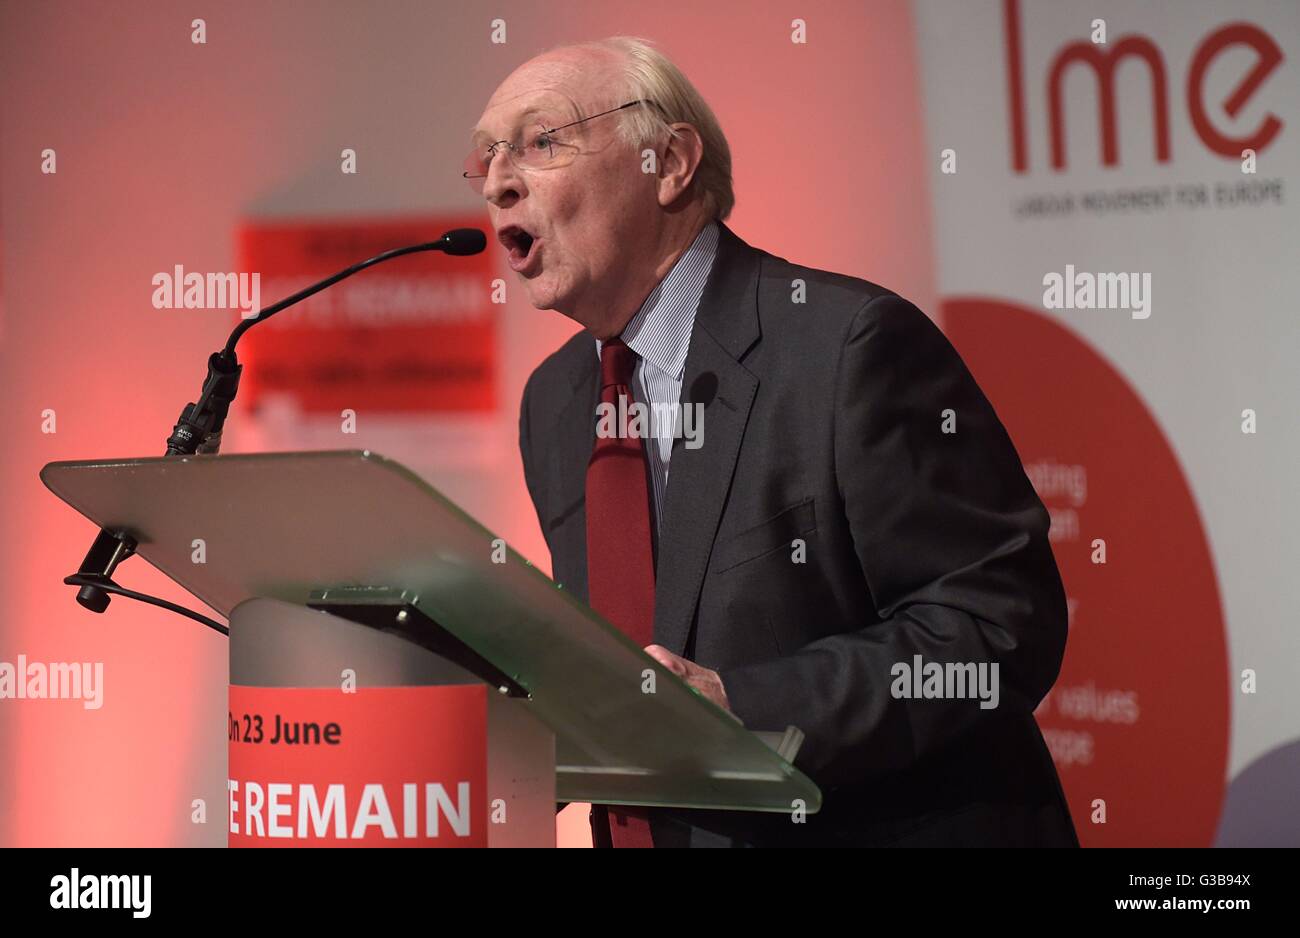 Former Labour leader Neil Kinnock speaks during a Labour Party pro EU rally at the Royal Concert Hall in Glasgow, ahead of the June 23 referendum on Britain's EU membership. Stock Photo